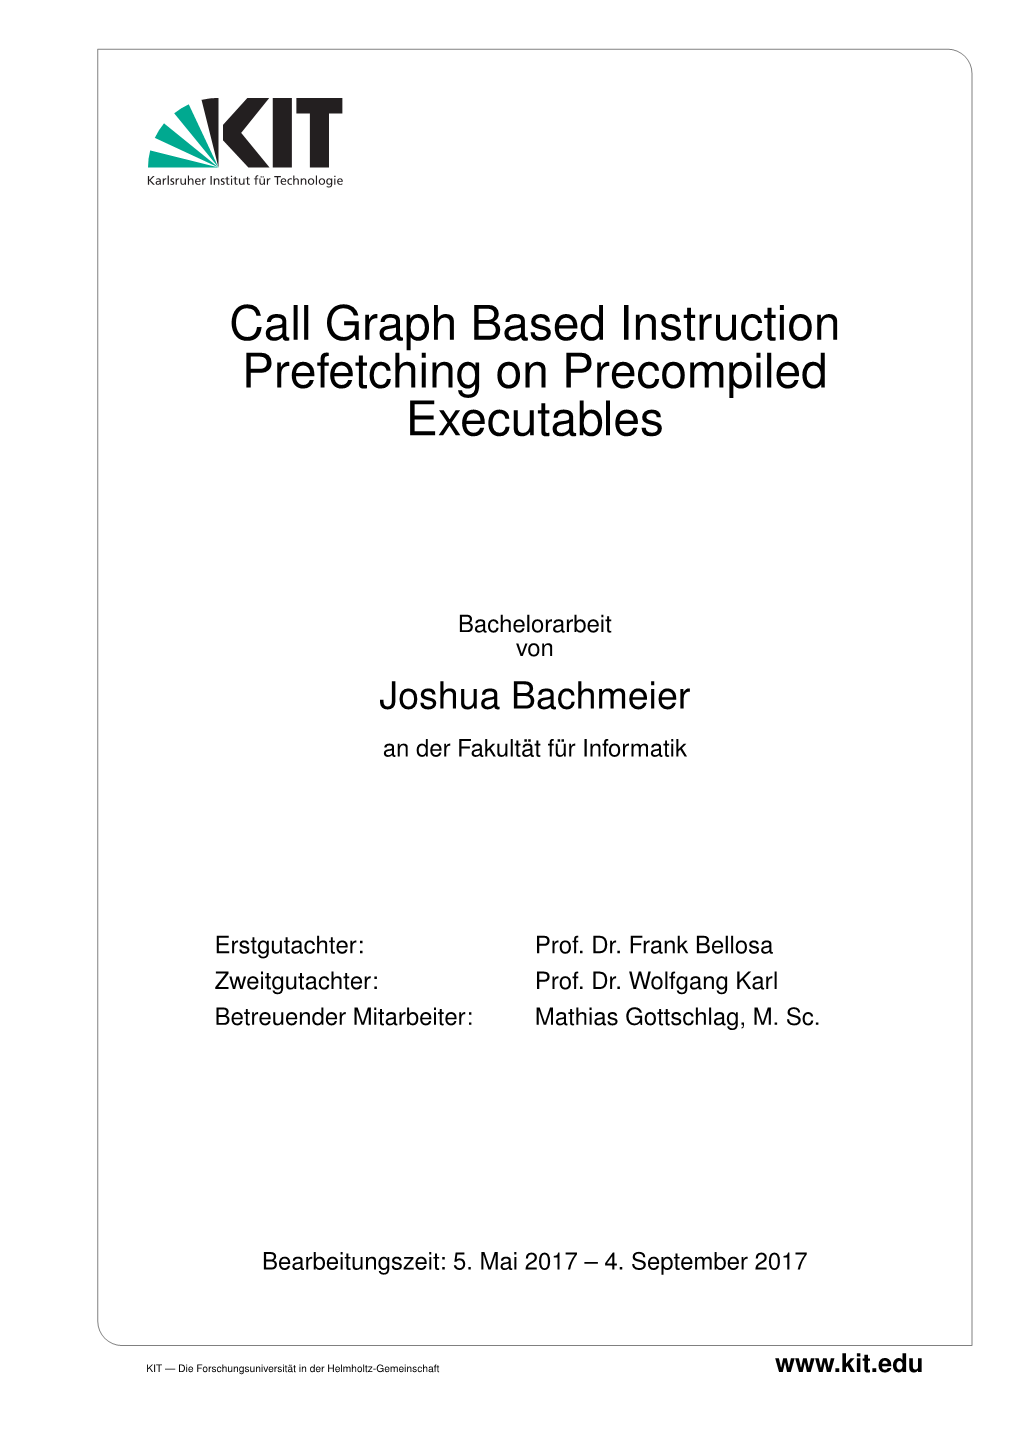 Call Graph Based Instruction Prefetching on Precompiled Executables